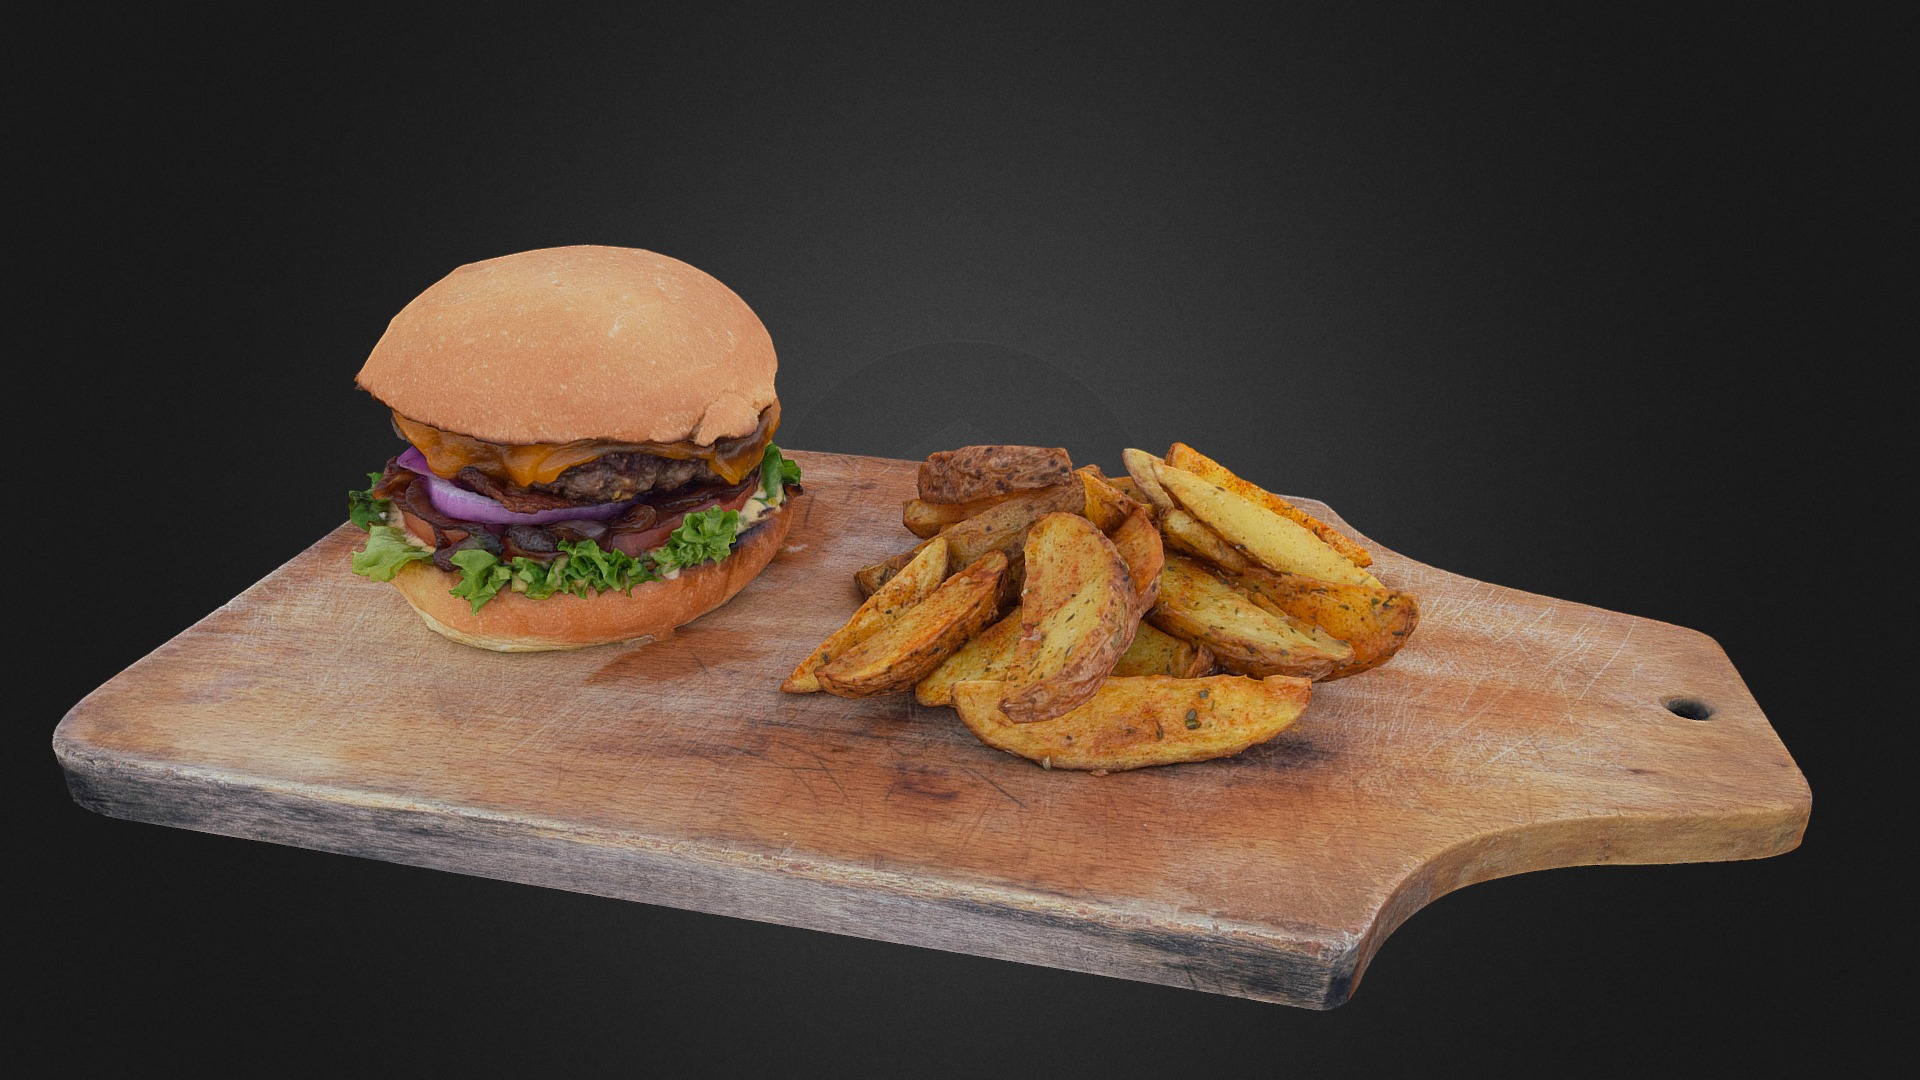 3D model 3D-BURGER - This is a 3D model of the 3D-BURGER. The 3D model is about a hamburger and fries on a cutting board.